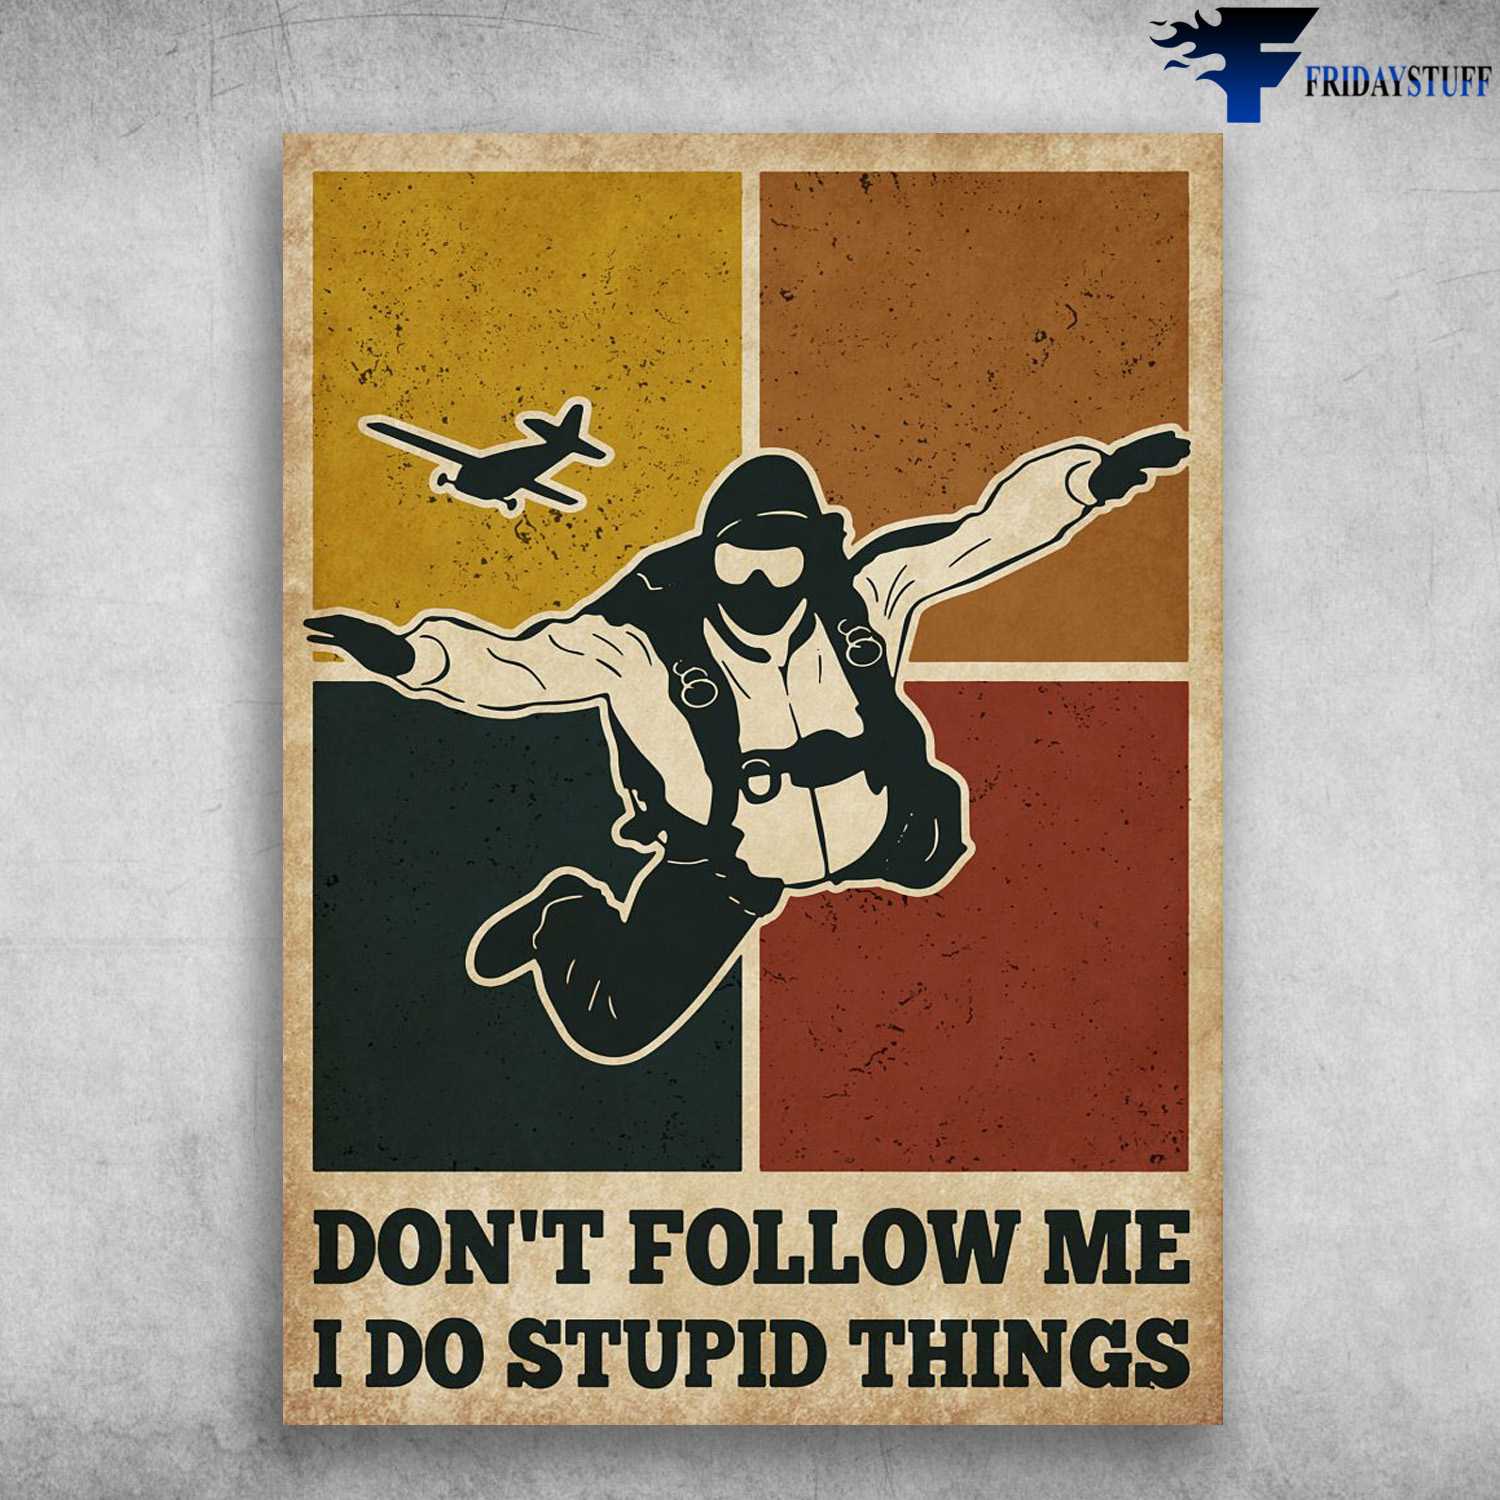 Skydiving Man, Skydiving Poster, Don't Follow Me, I Do Stupid Things